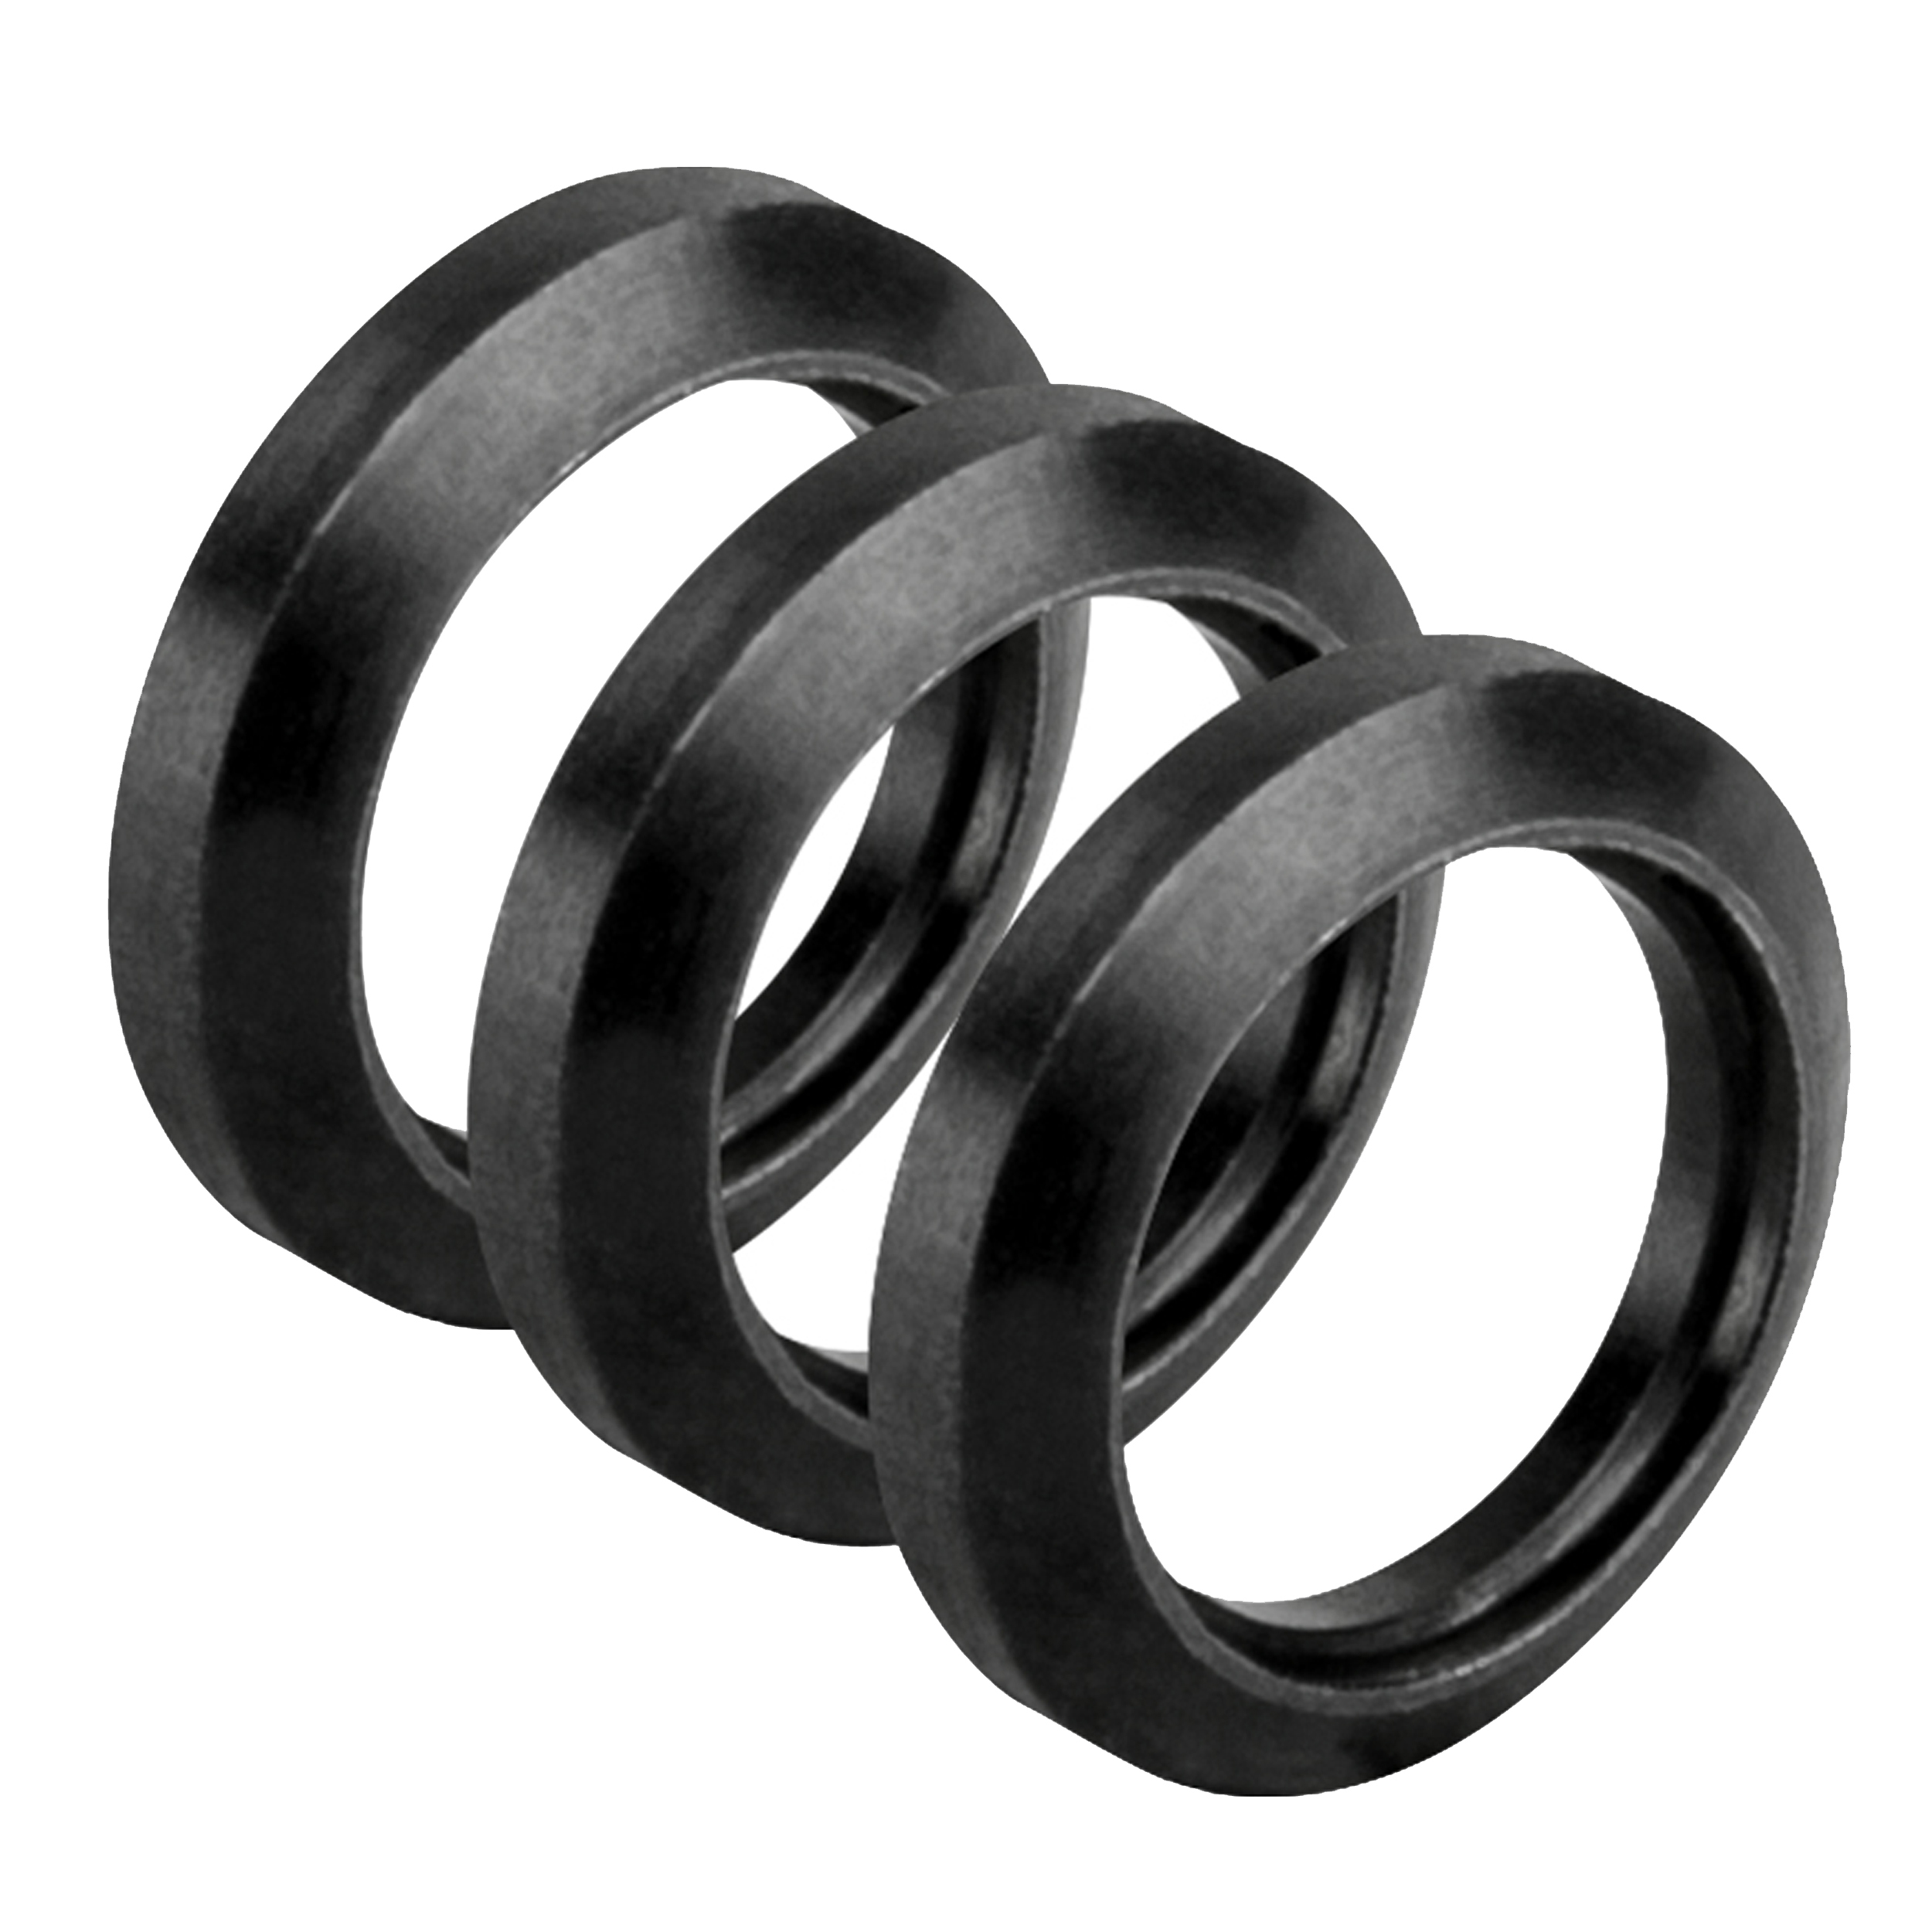 19mm OD 14mm ID Tight Fit Crush Washer for Muzzle Brake for Gunsmithing 14 